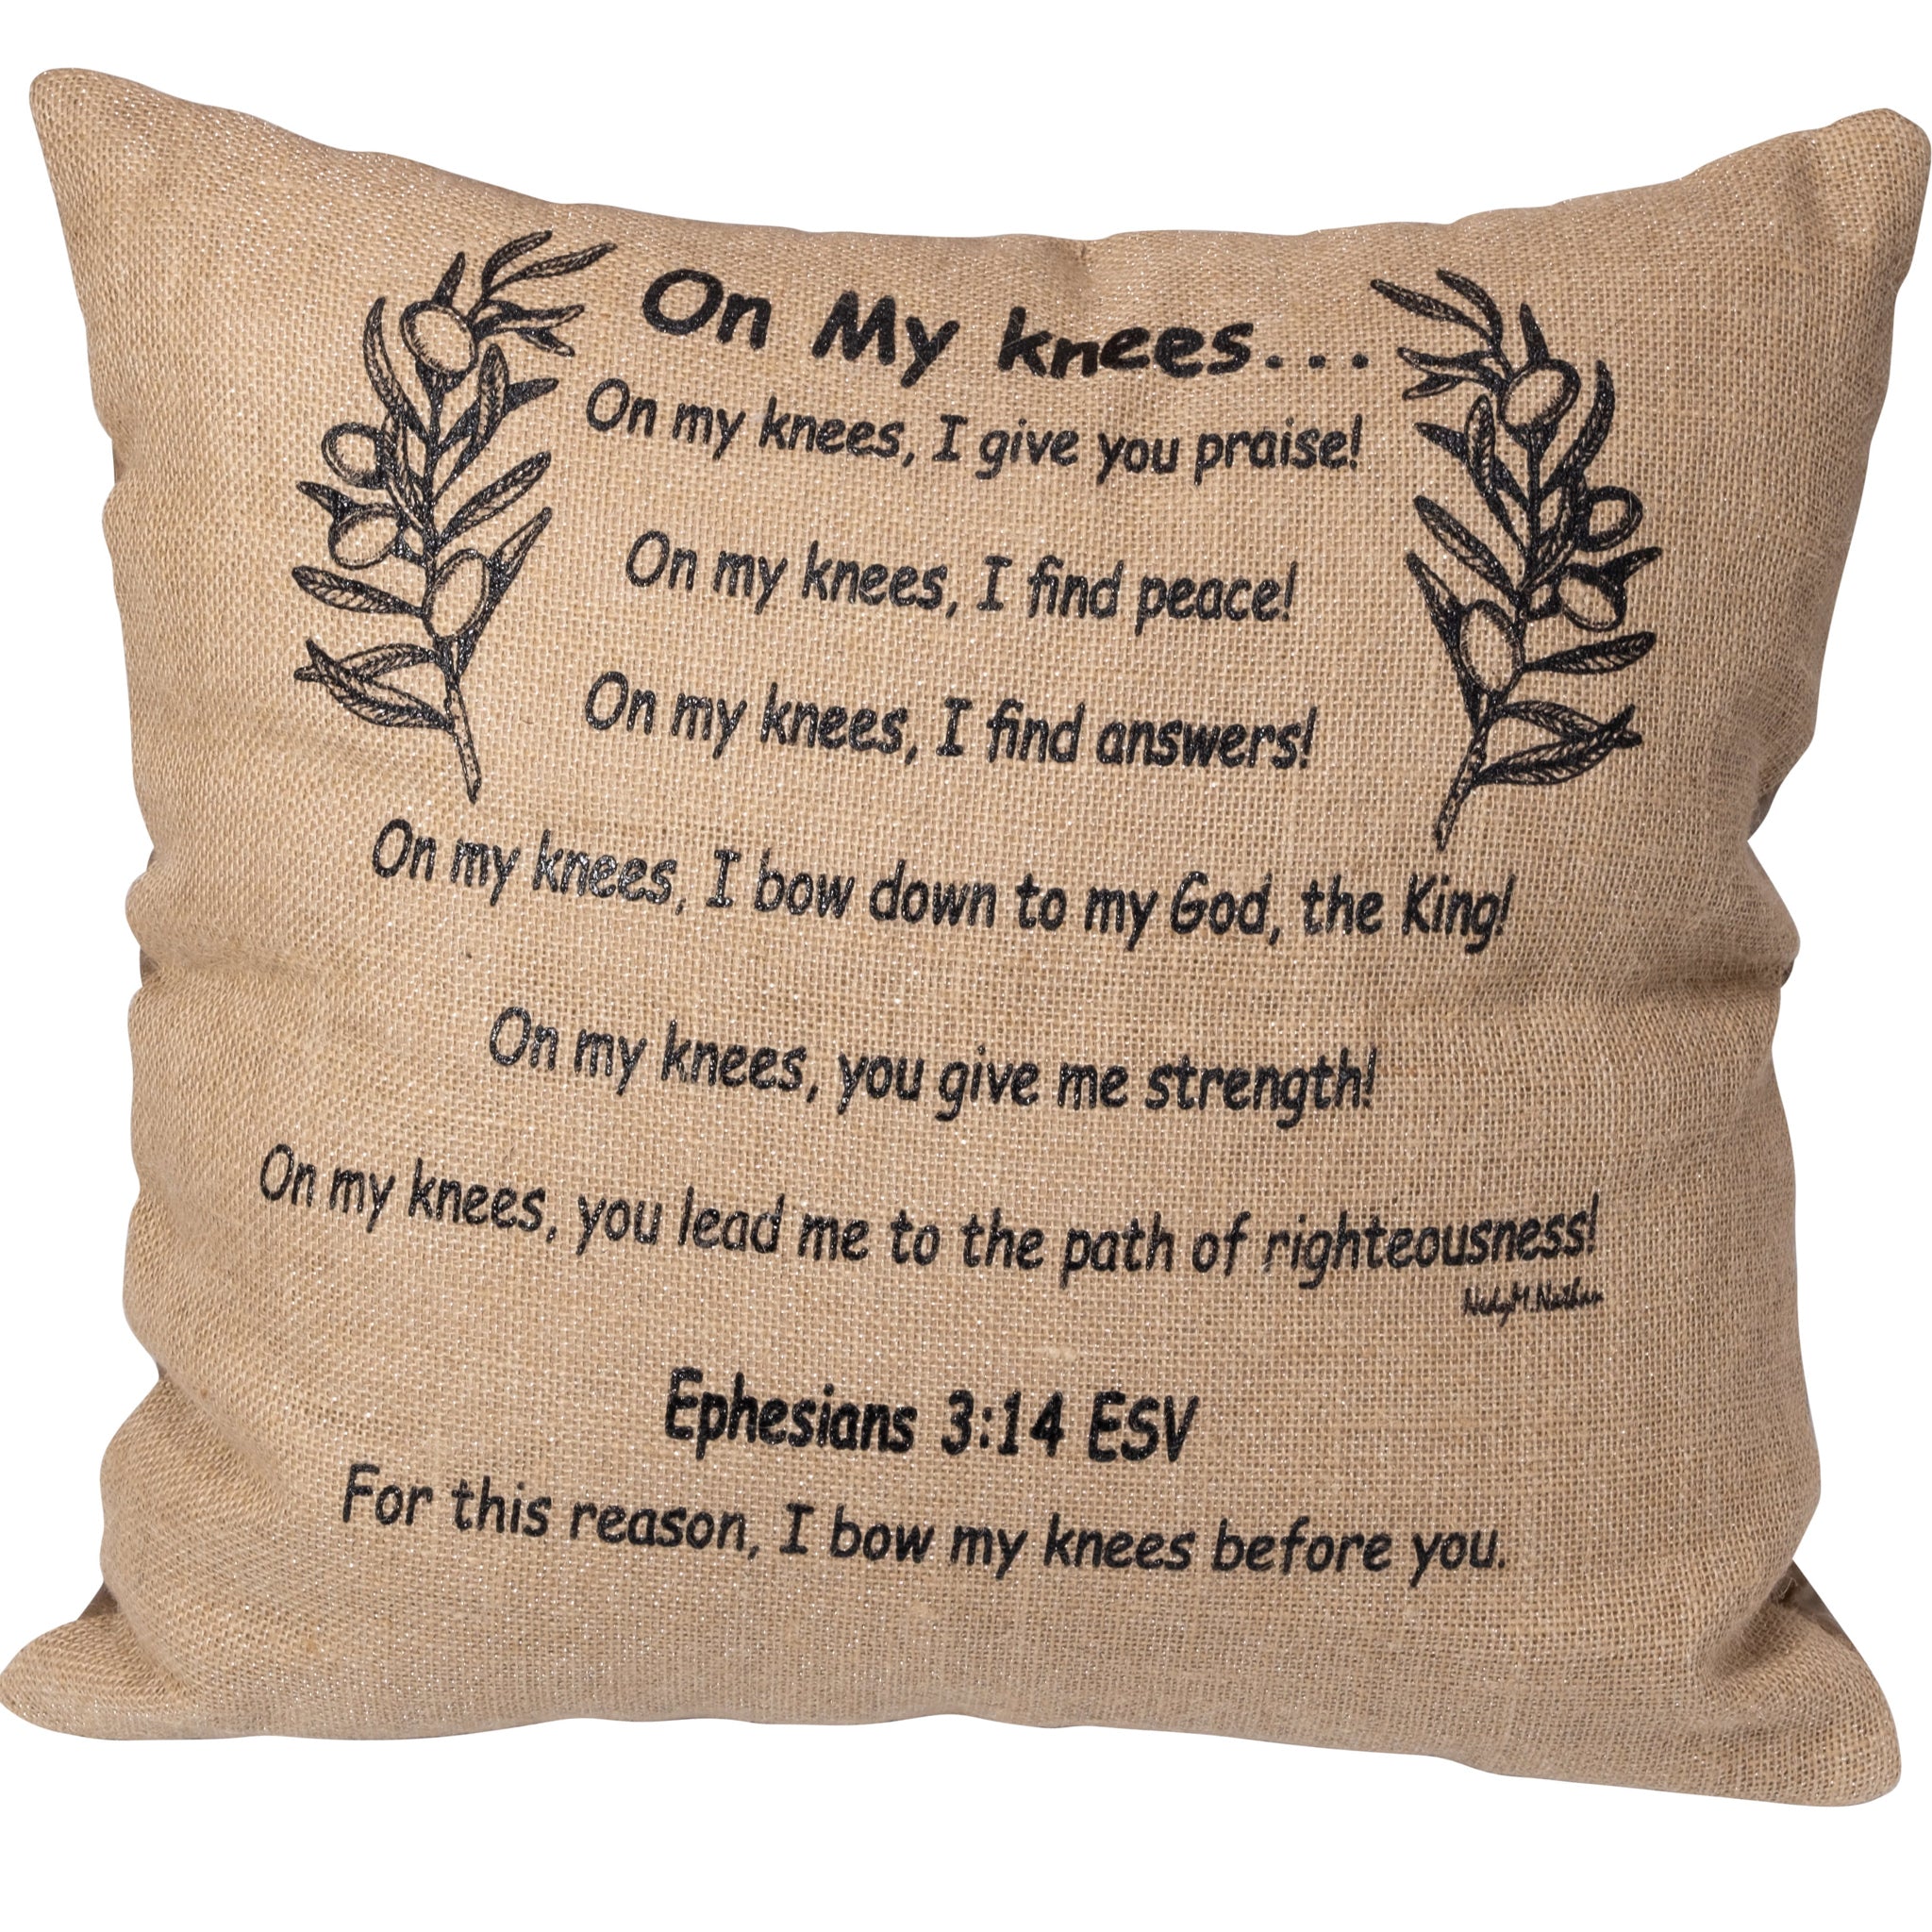 god answers knee-mail' Throw Pillow Cover 18” x 18”